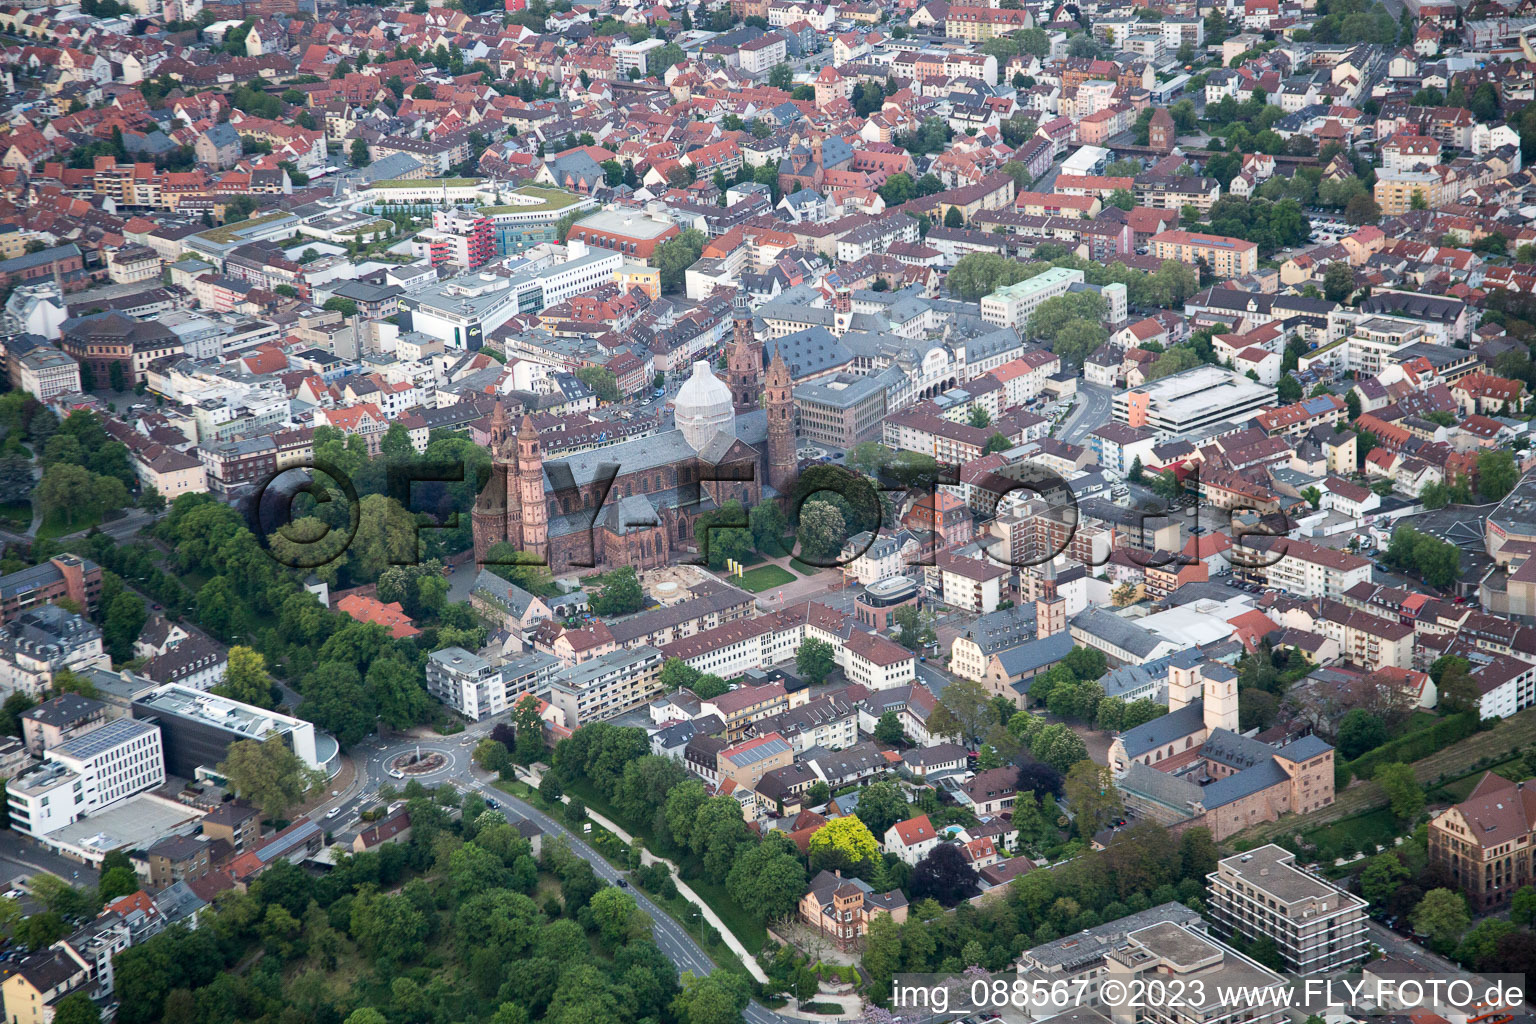 Aerial view of Imperial Cathedral of St. Peter in Worms in the state Rhineland-Palatinate, Germany